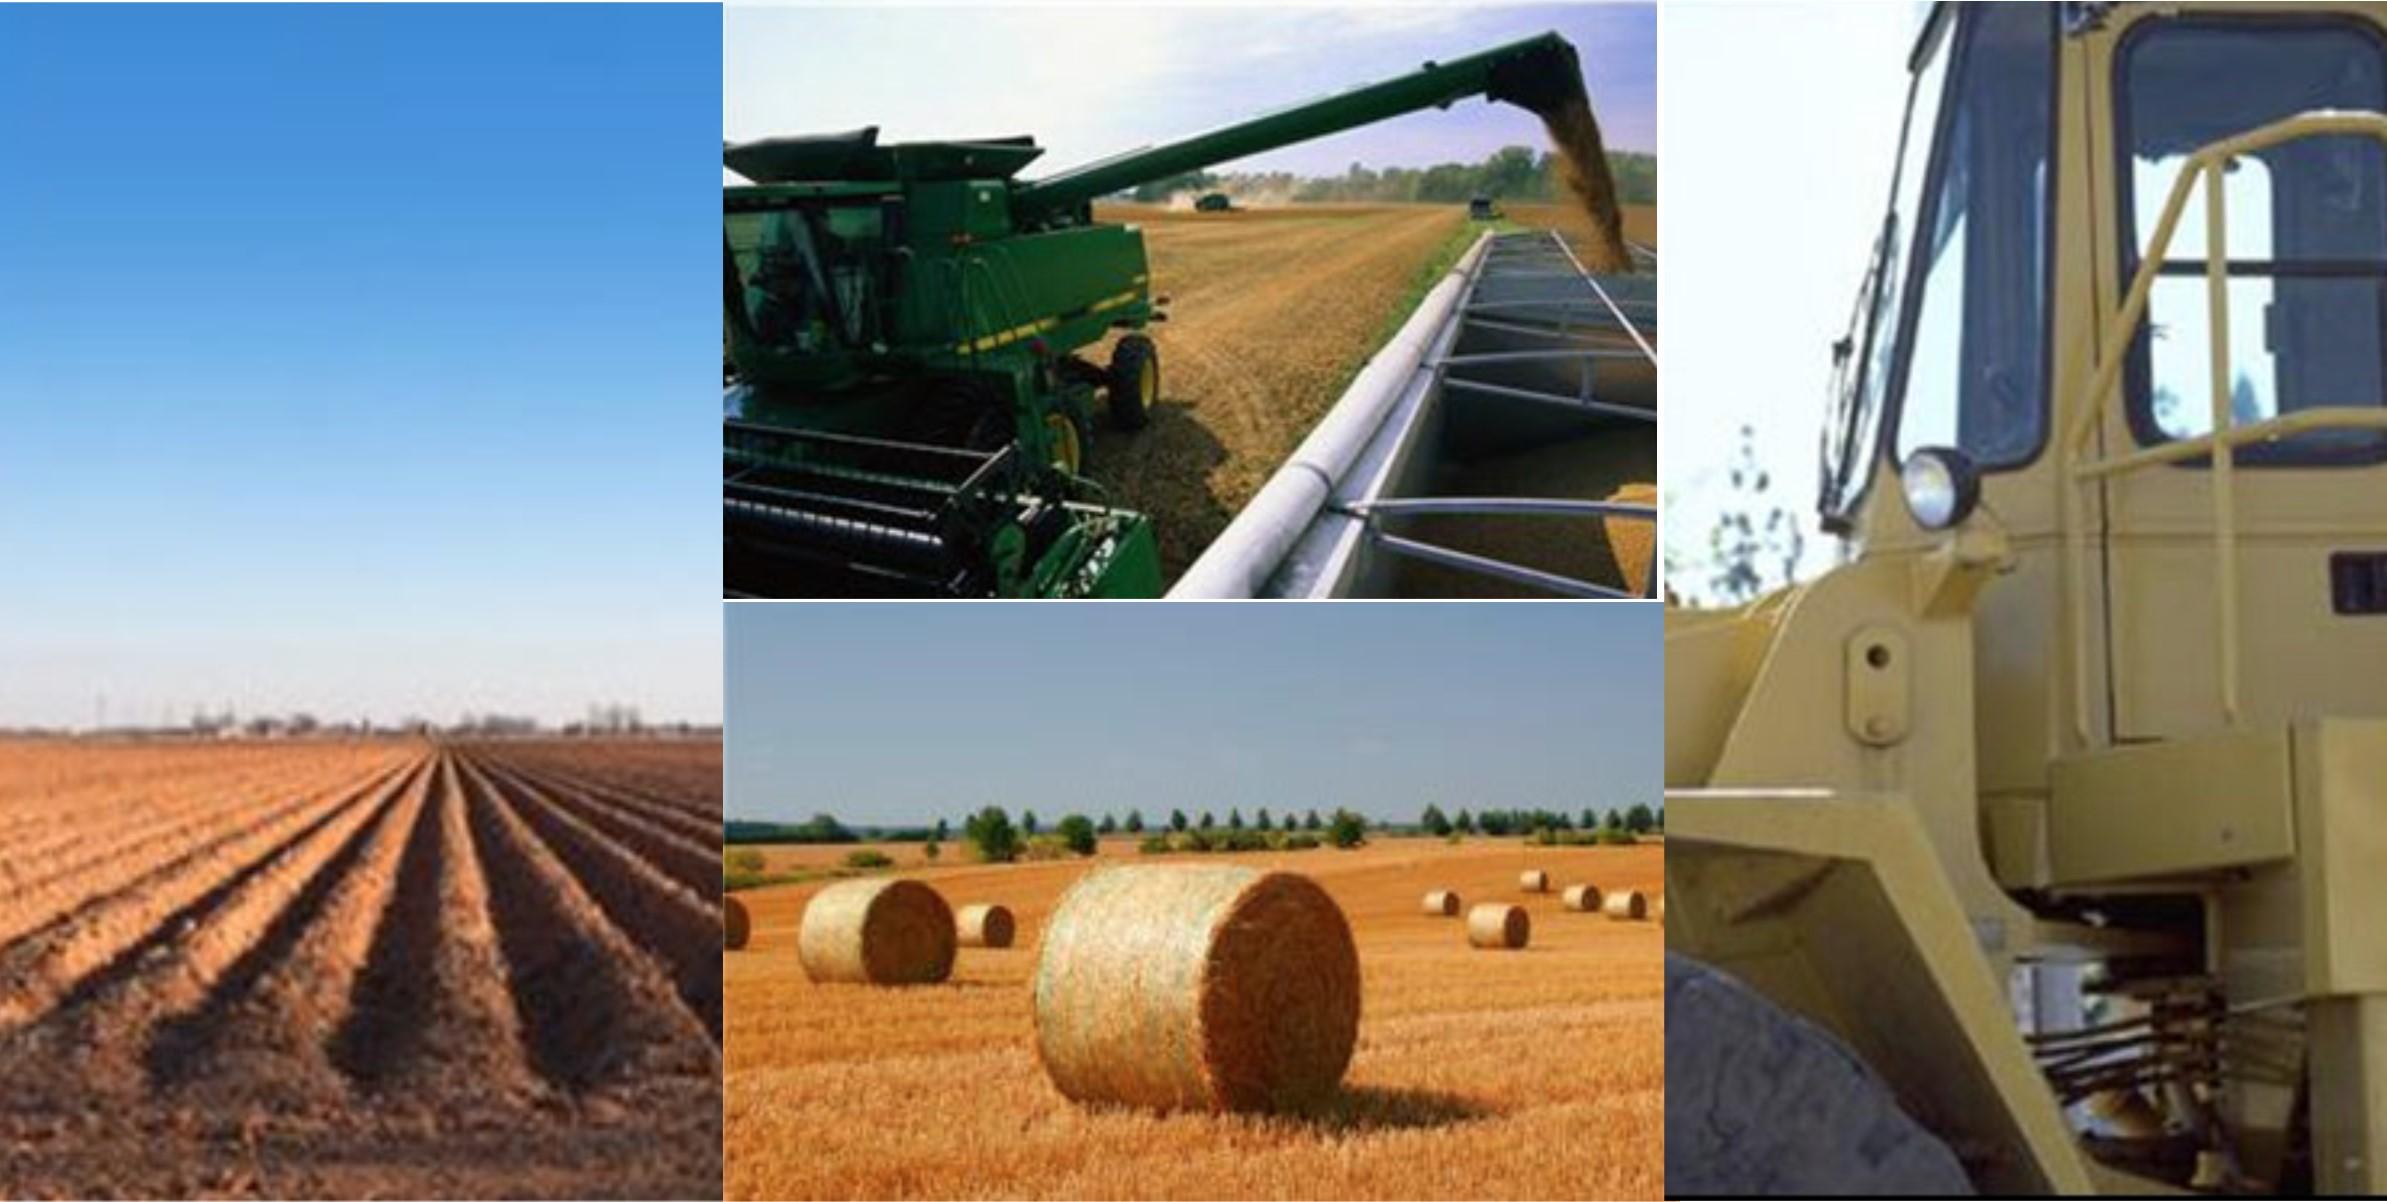 Collage of Agricultural work (machinery, grain harvest, harvesting hay, etc.)